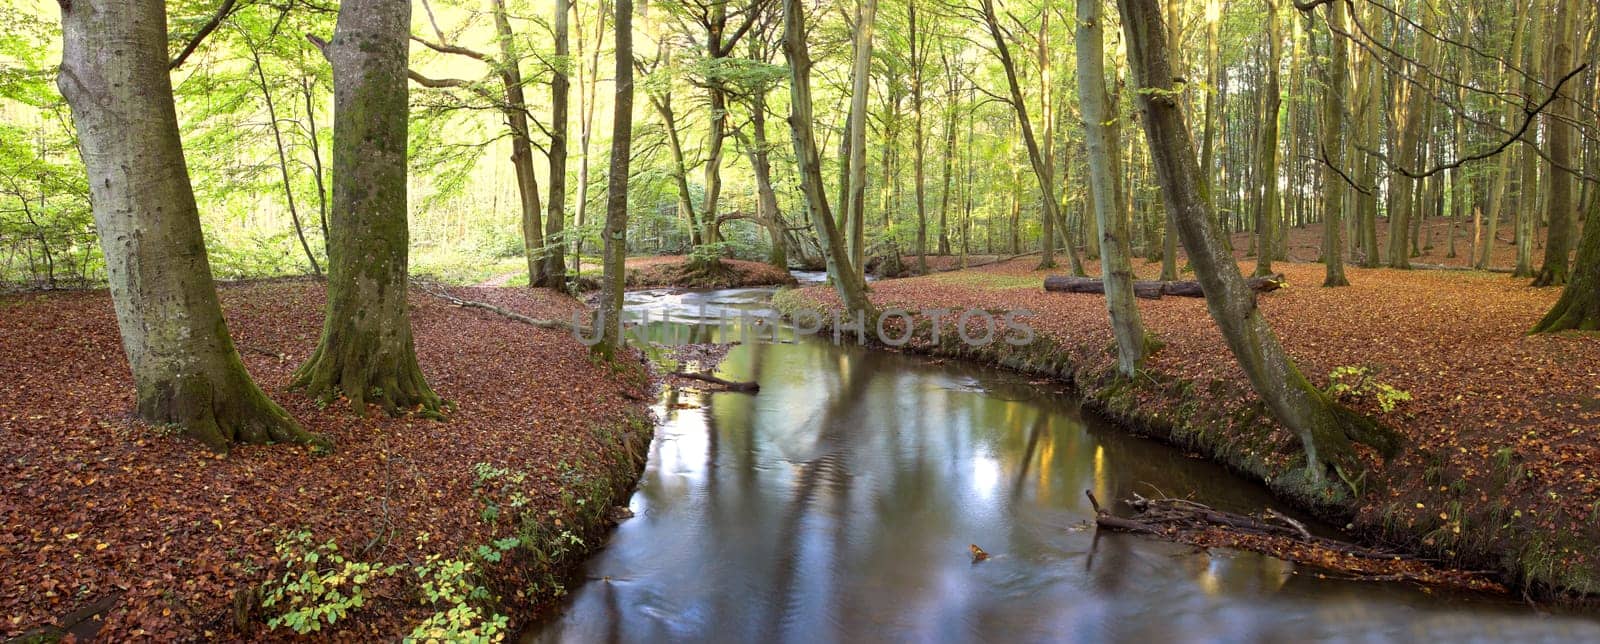 Tree trunks and a river in a forest with red leaves covering the ground. Scenic landscape of woods in the autumn showing vibrant colors. A background of greenery on a summer day in the wilderness.